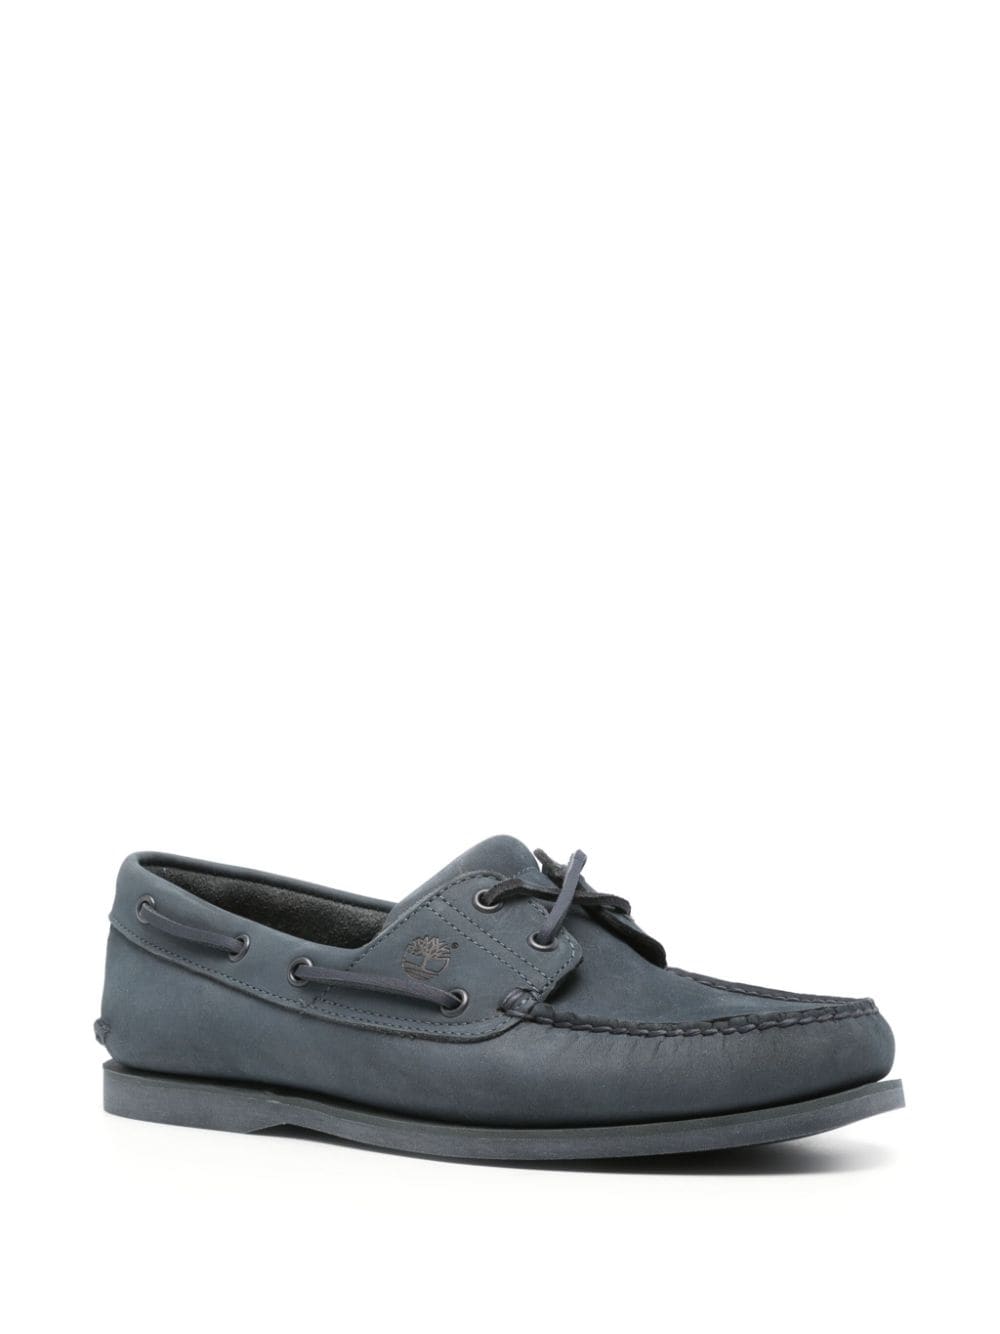 Timberland Classic leather boat shoes - Blauw